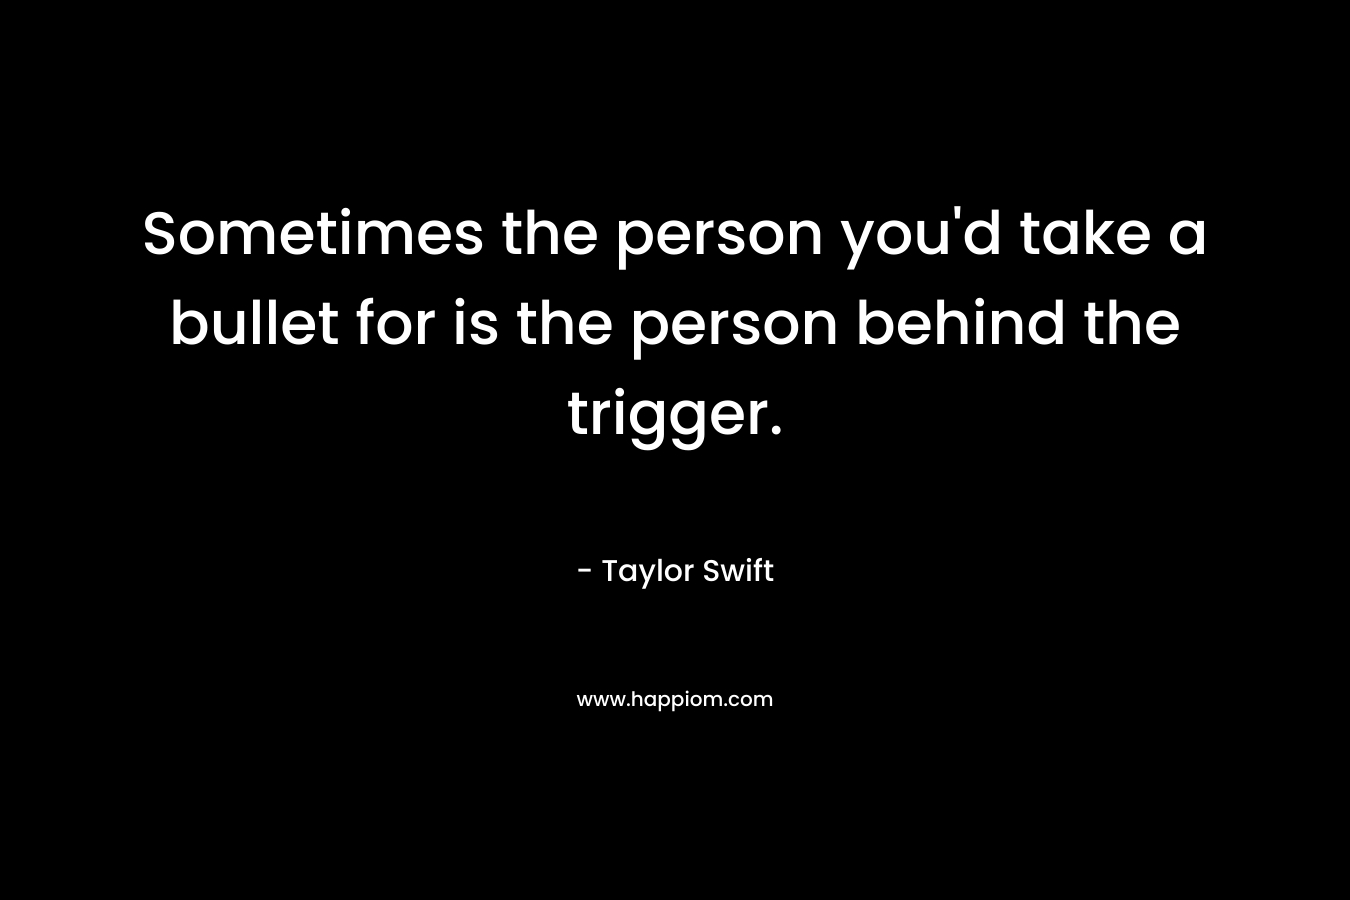 Sometimes the person you'd take a bullet for is the person behind the trigger.